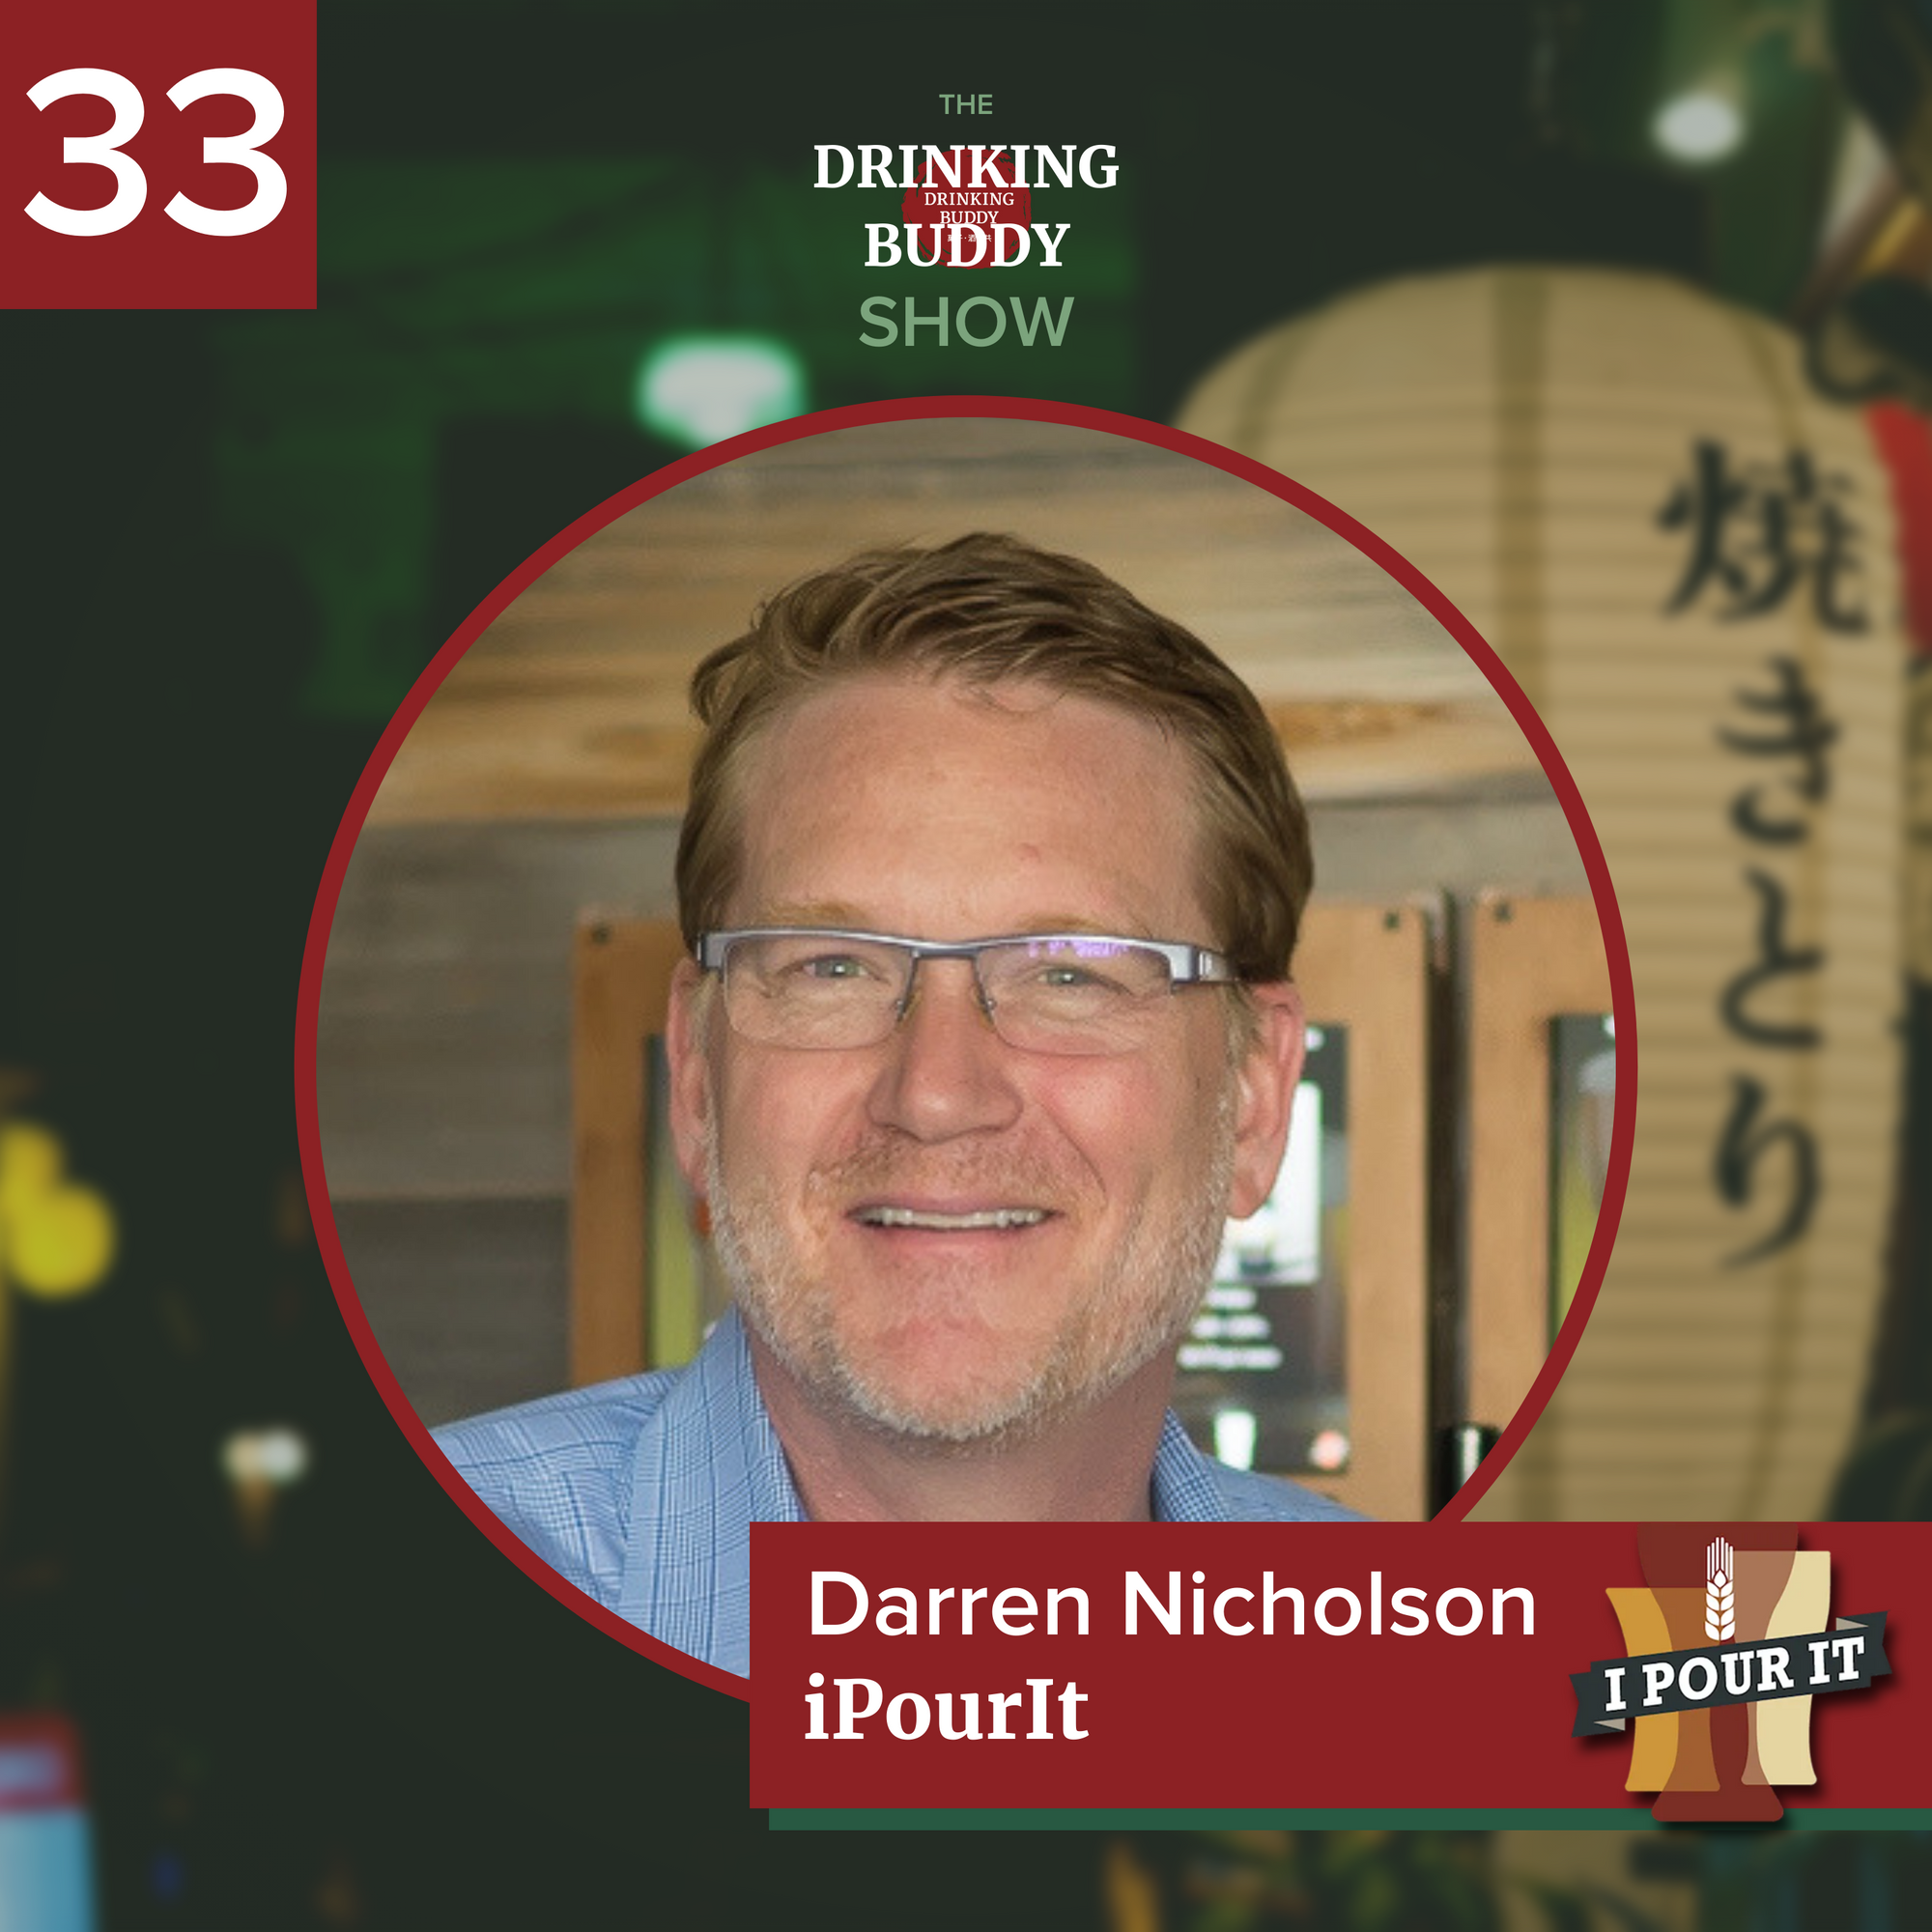 The Drinking Buddy Show Episode 33: Darren Nicholson of iPourIt